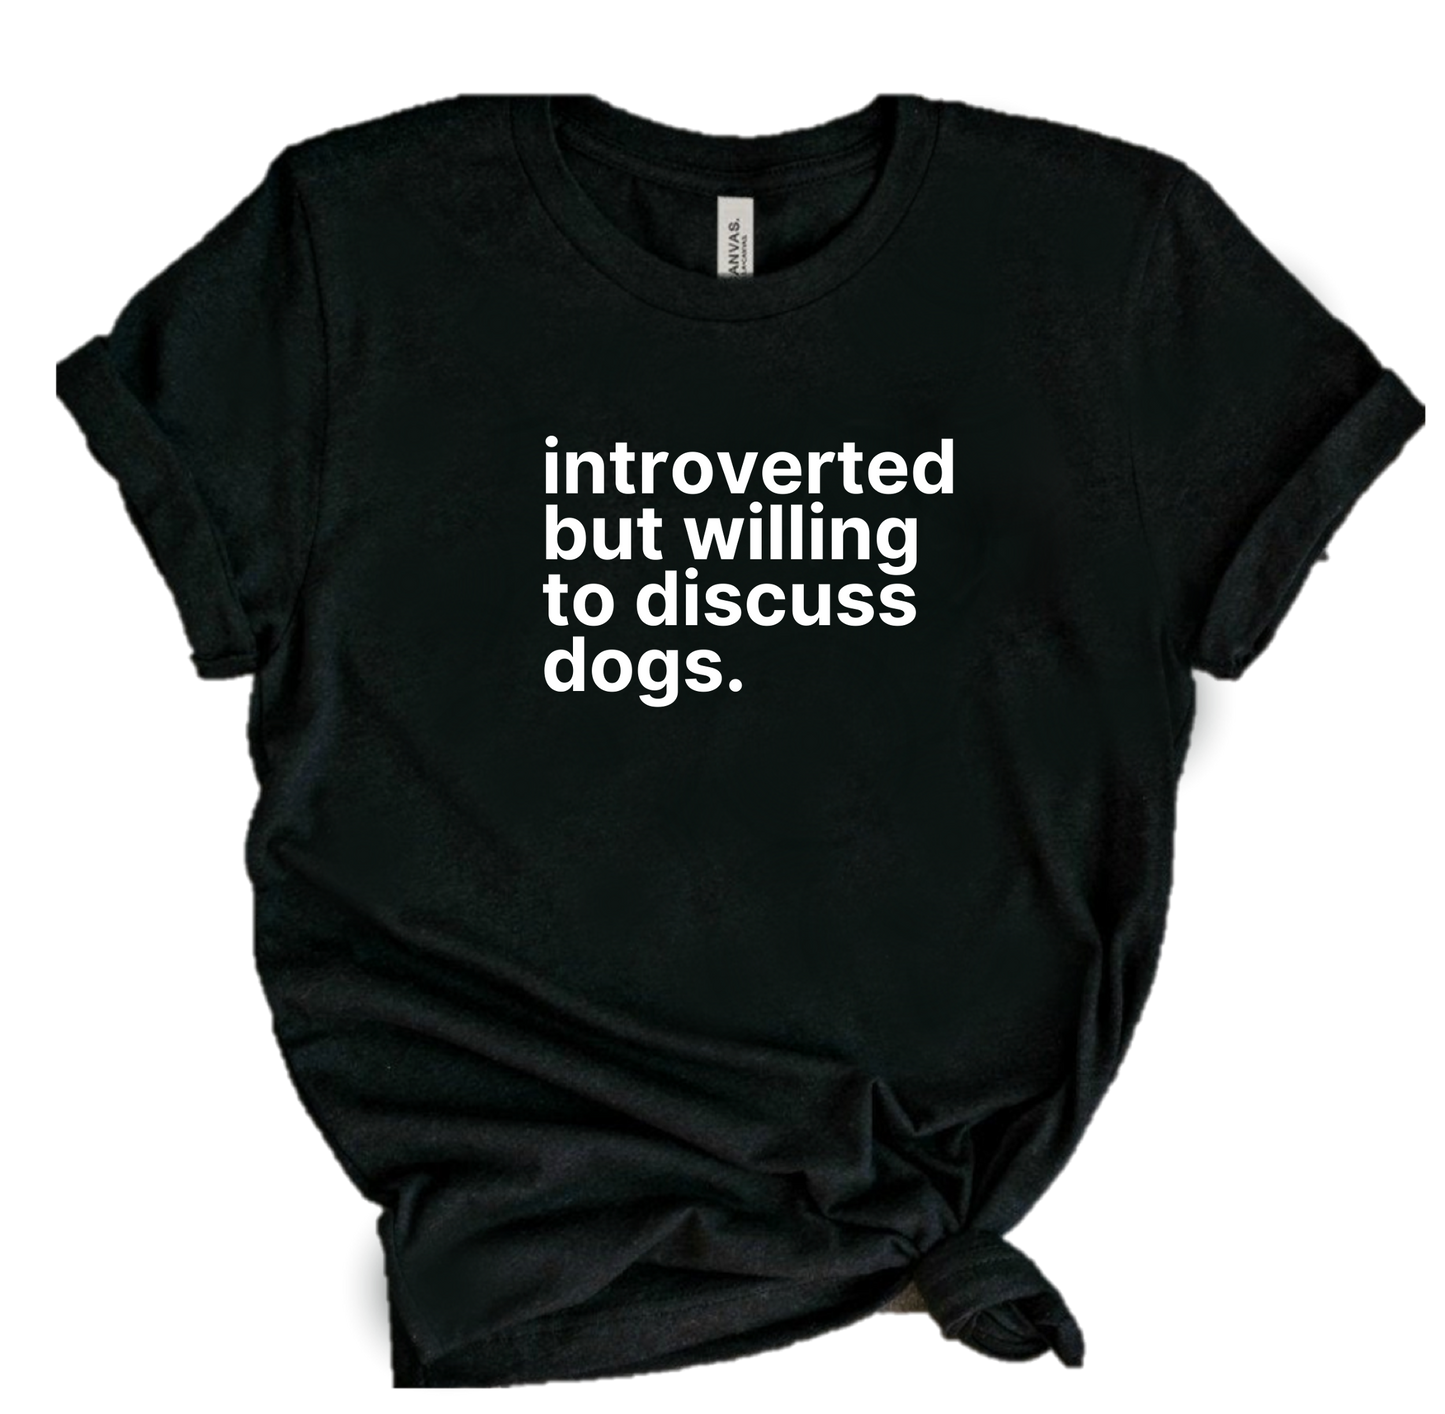 INTROVERTED BUT WILLING TO DISCUSS DOGS